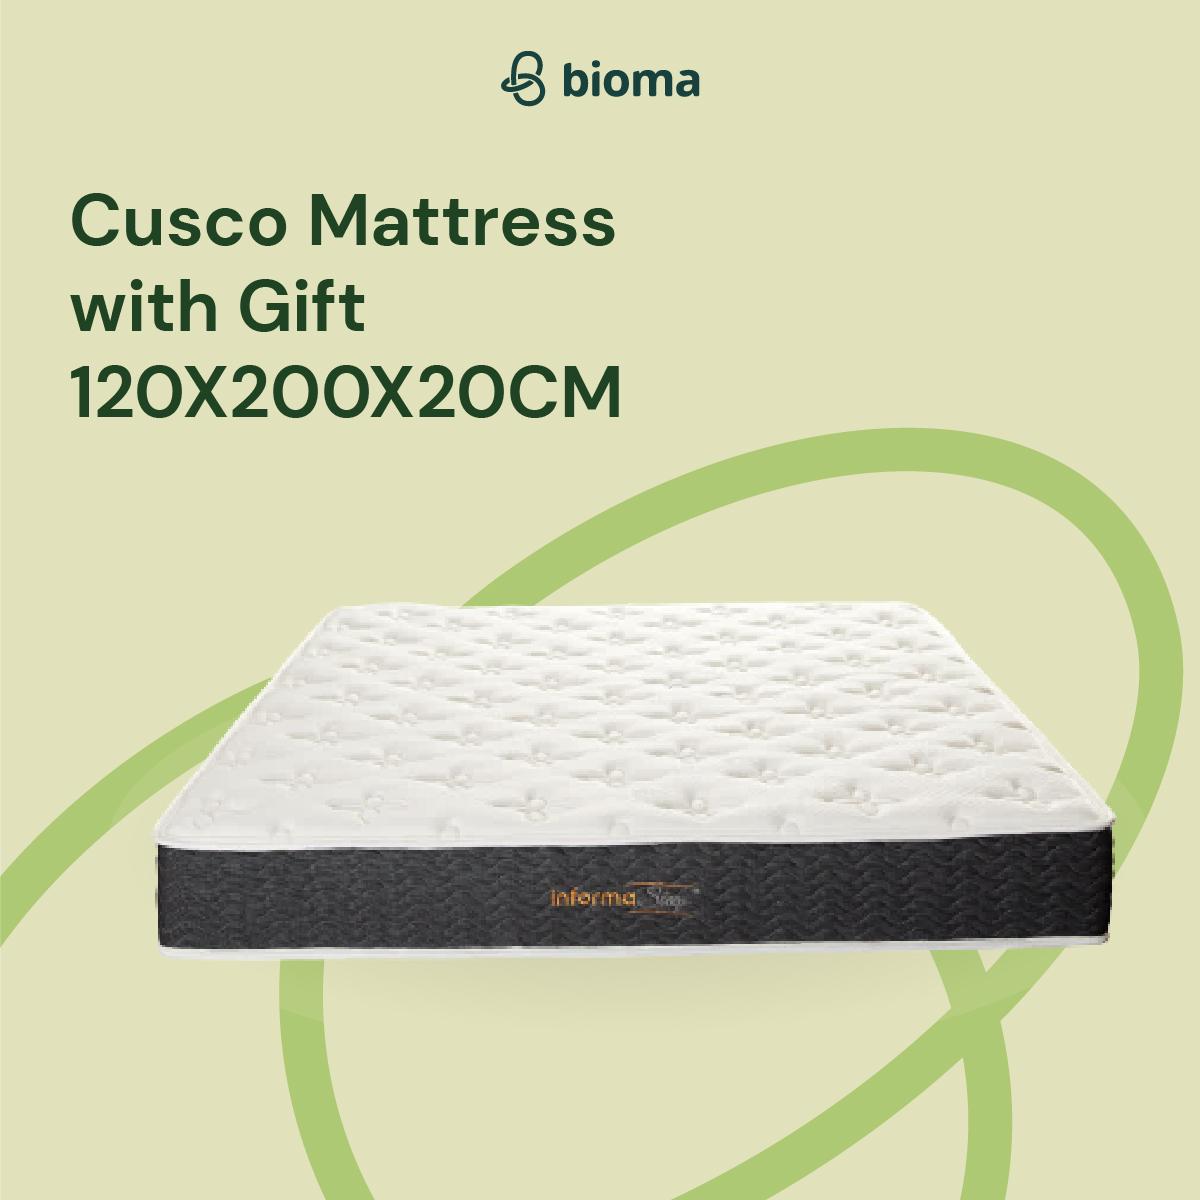 Cusco Mattress with Gift